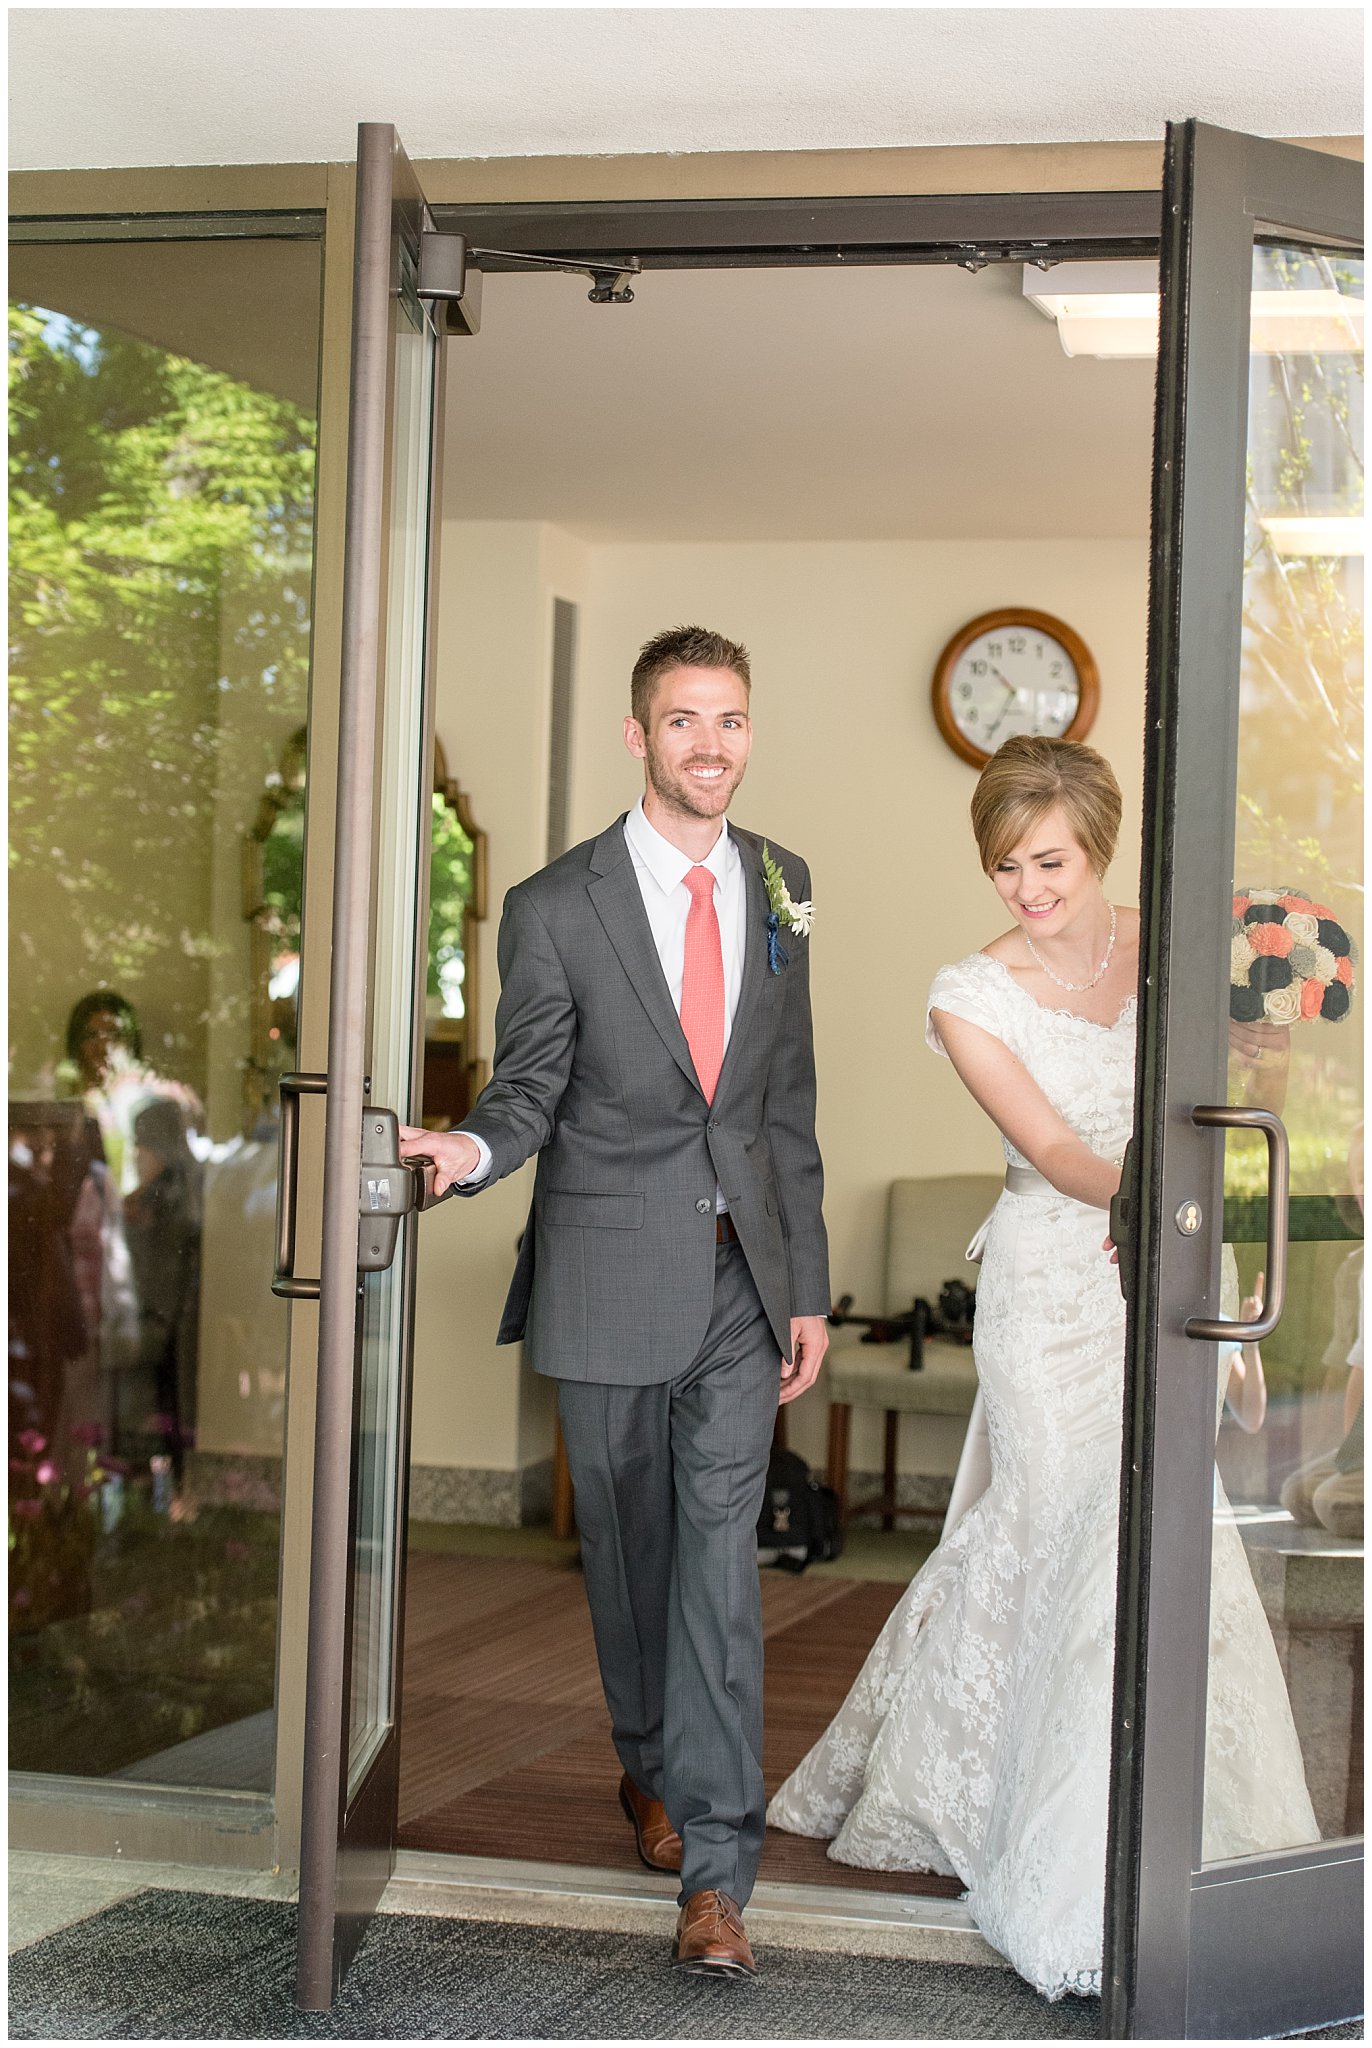 Salt Lake Temple bride and groom exit | Coral and grey spring wedding